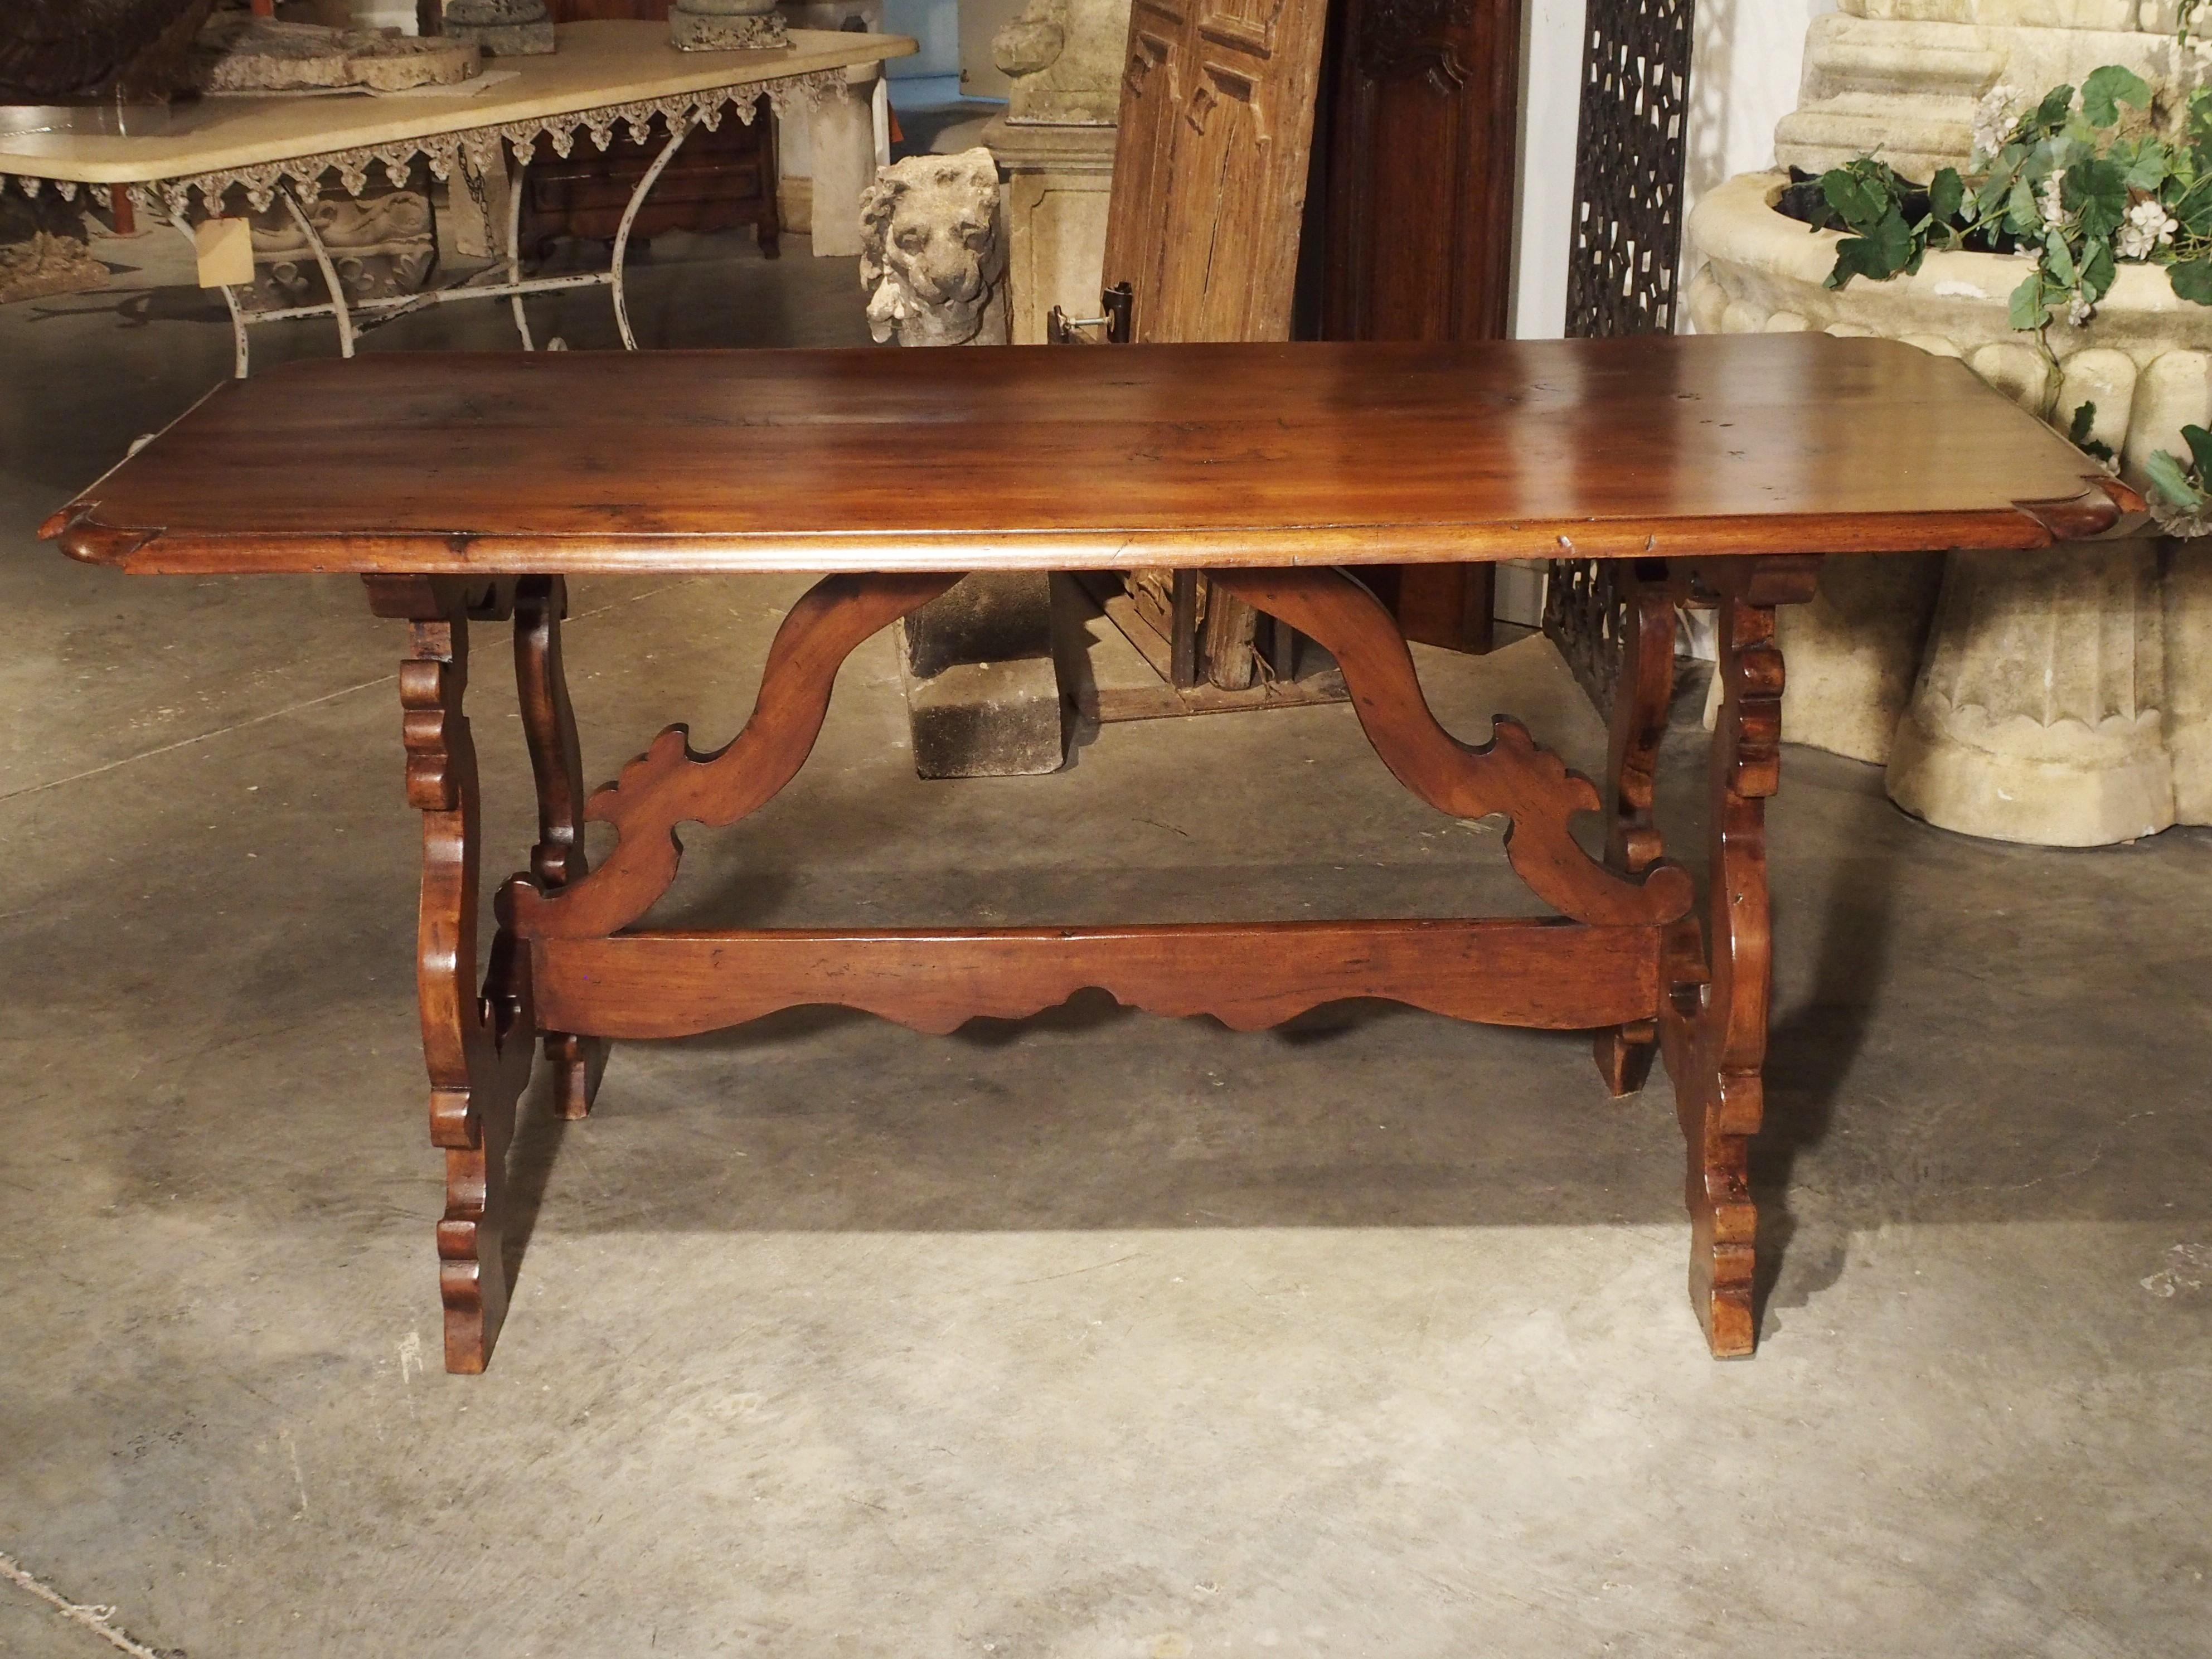 From the 19th Century, this table from Tuscany has a top with arched corners and a wonderful shaped wooden stretcher. There are C and S scroll shapes throughout the design of the legs and a double shaped stretcher, one that is horizontal and two